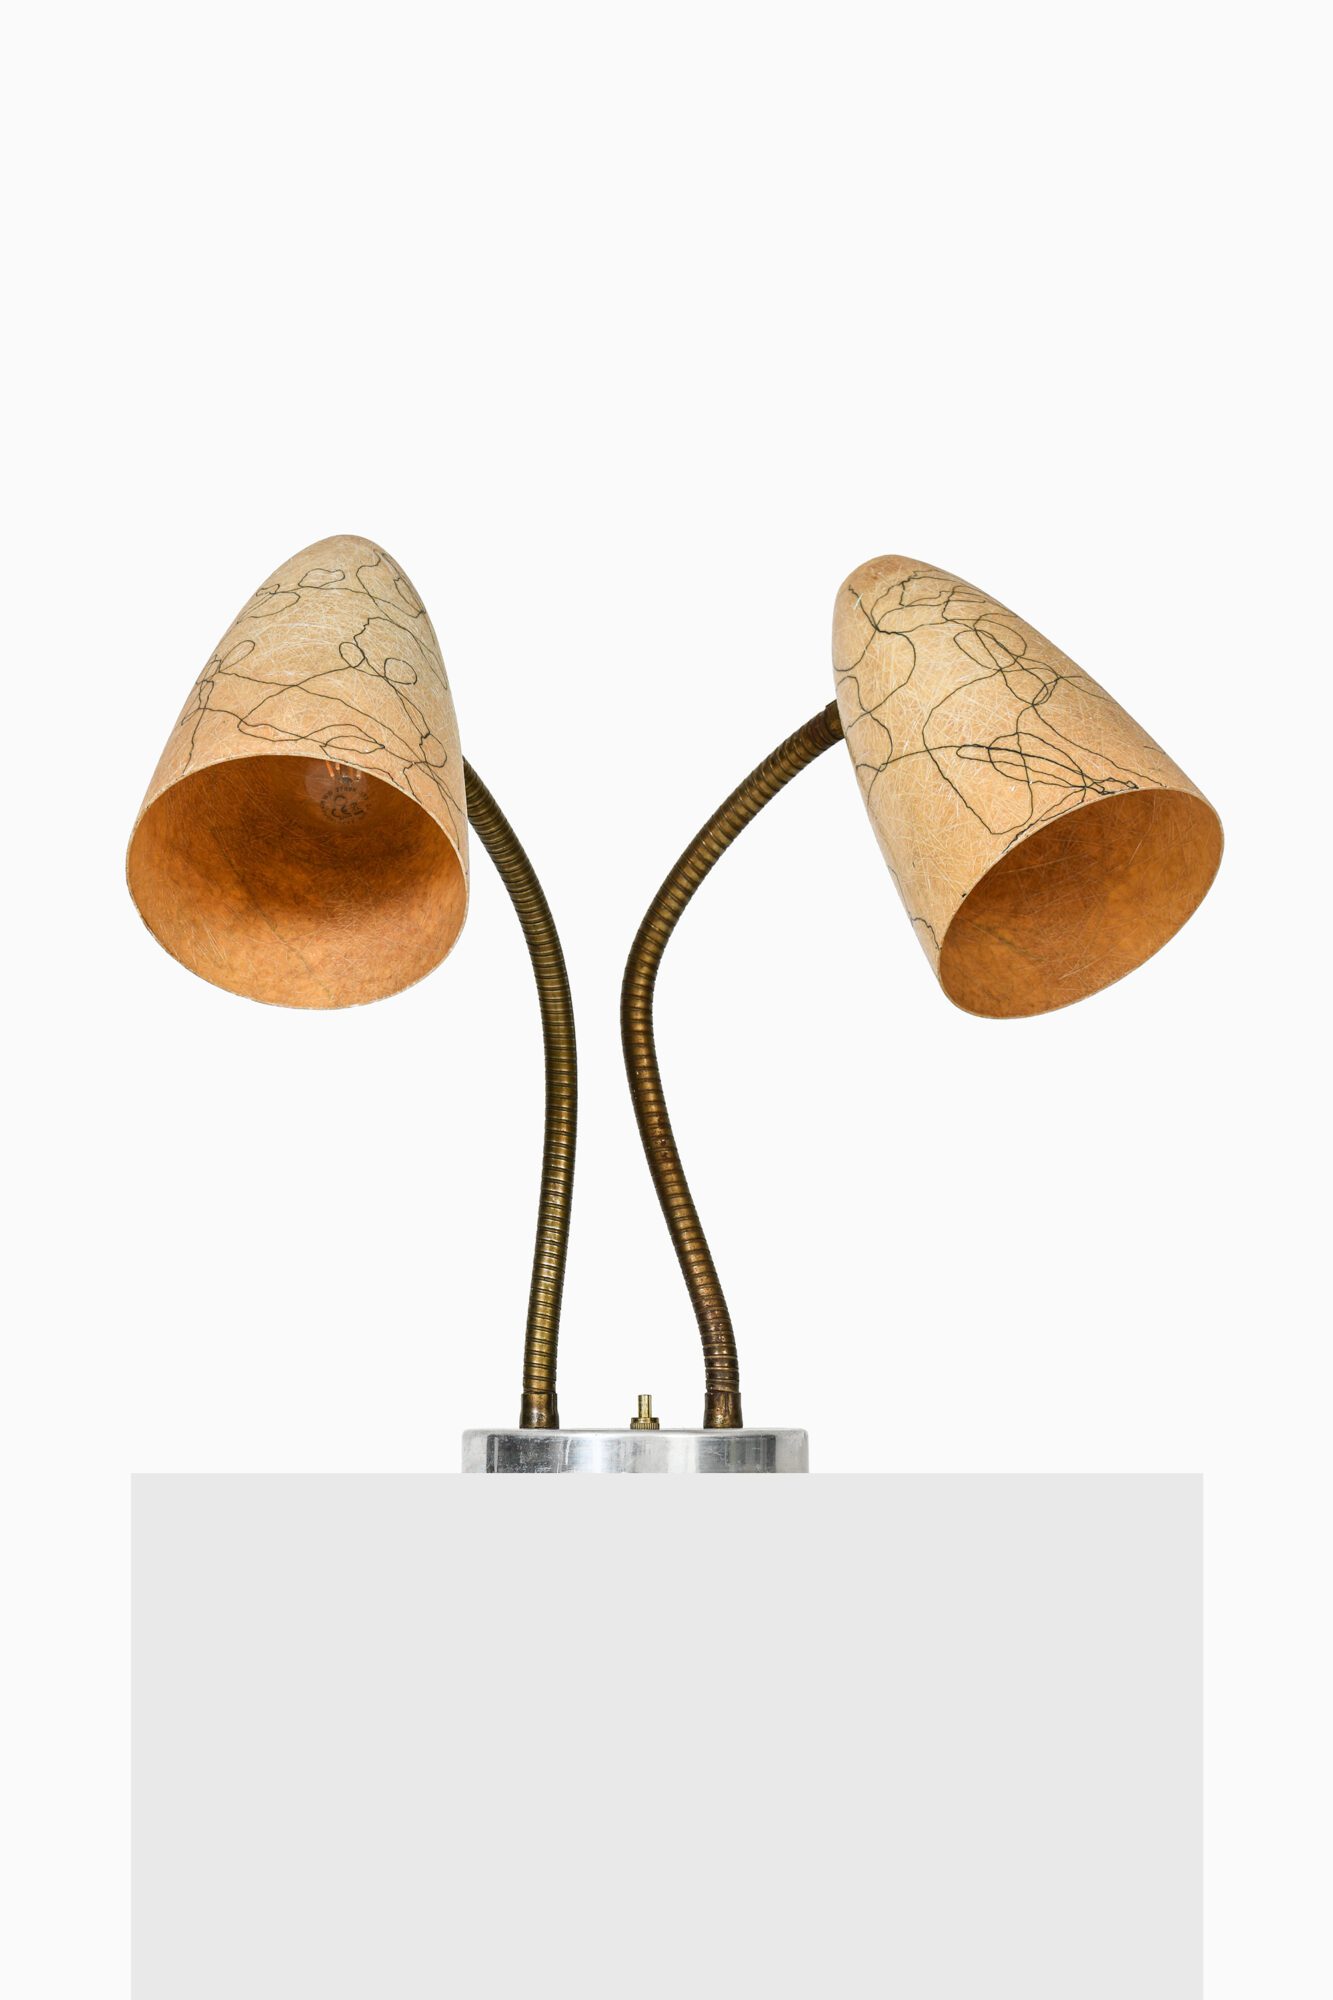 Table lamp with gooseneck arms at Studio Schalling